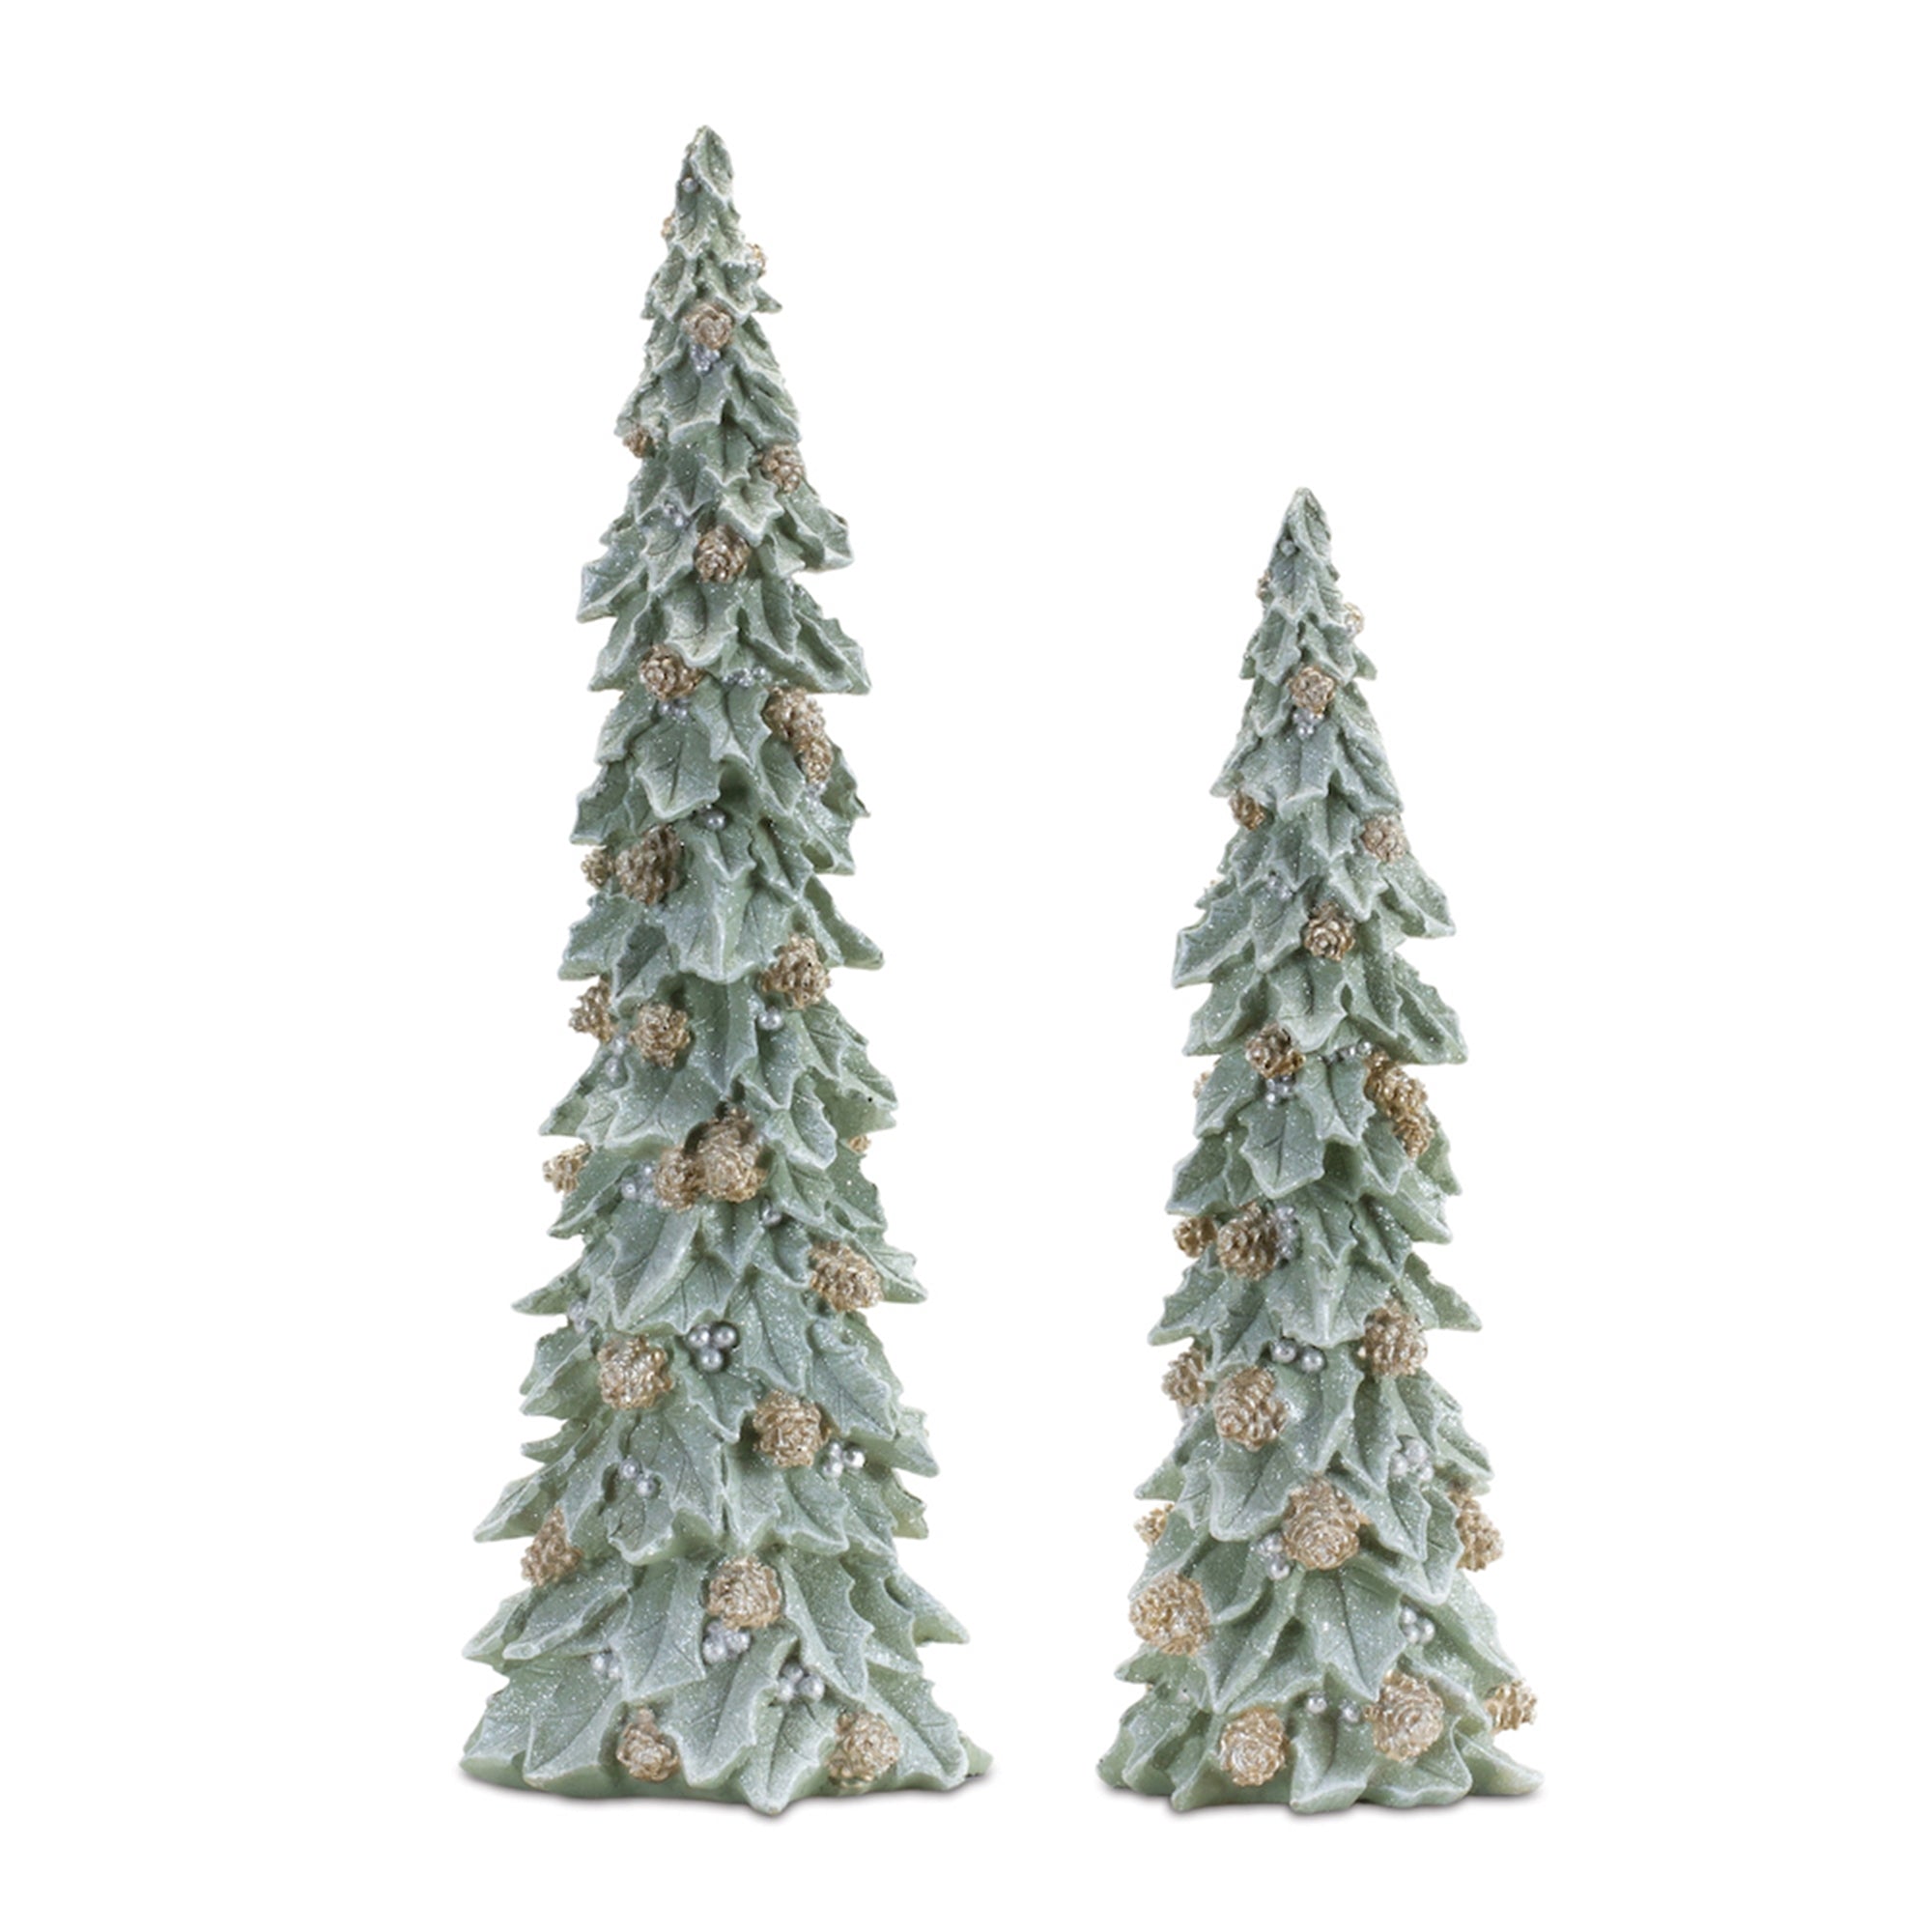 Glittered Holly Pinecone Tree (Set of 2)